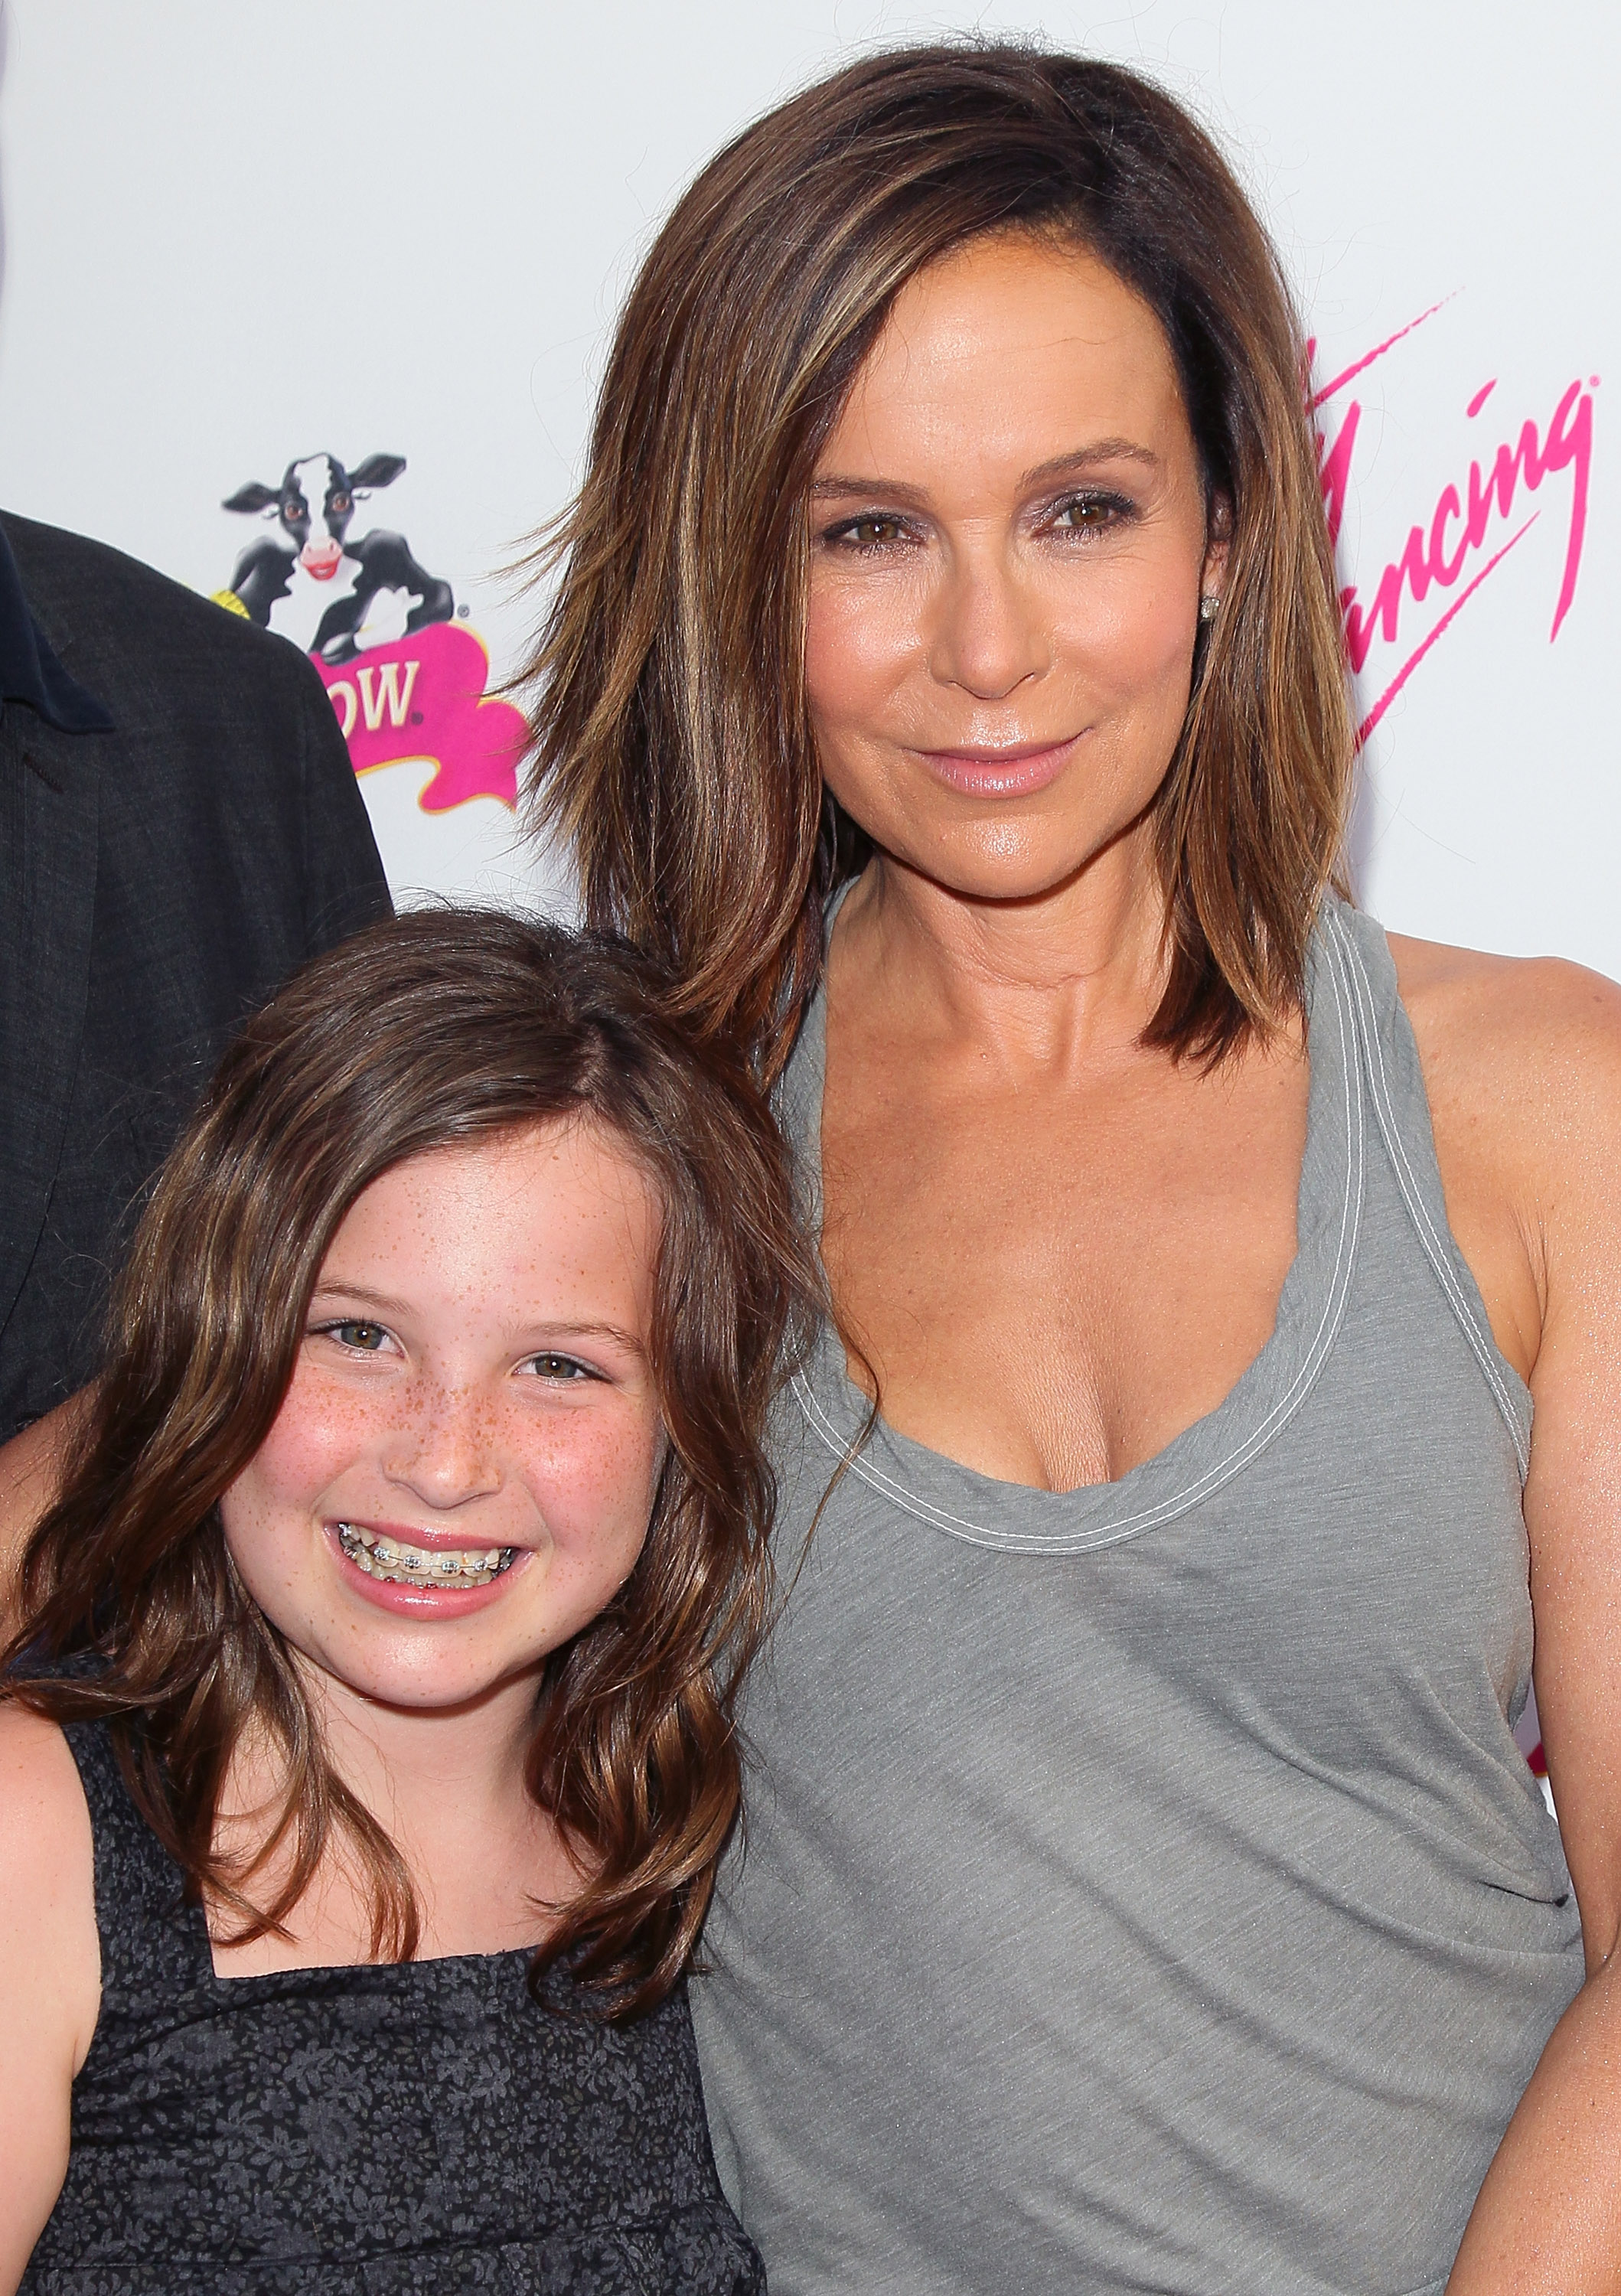 Stella Gregg and Jennifer Grey at the 25th anniversary of "Dirty Dancing" at Grauman's Chinese Theatre on August 21, 2012 in Hollywood, California. | Source: Getty Images